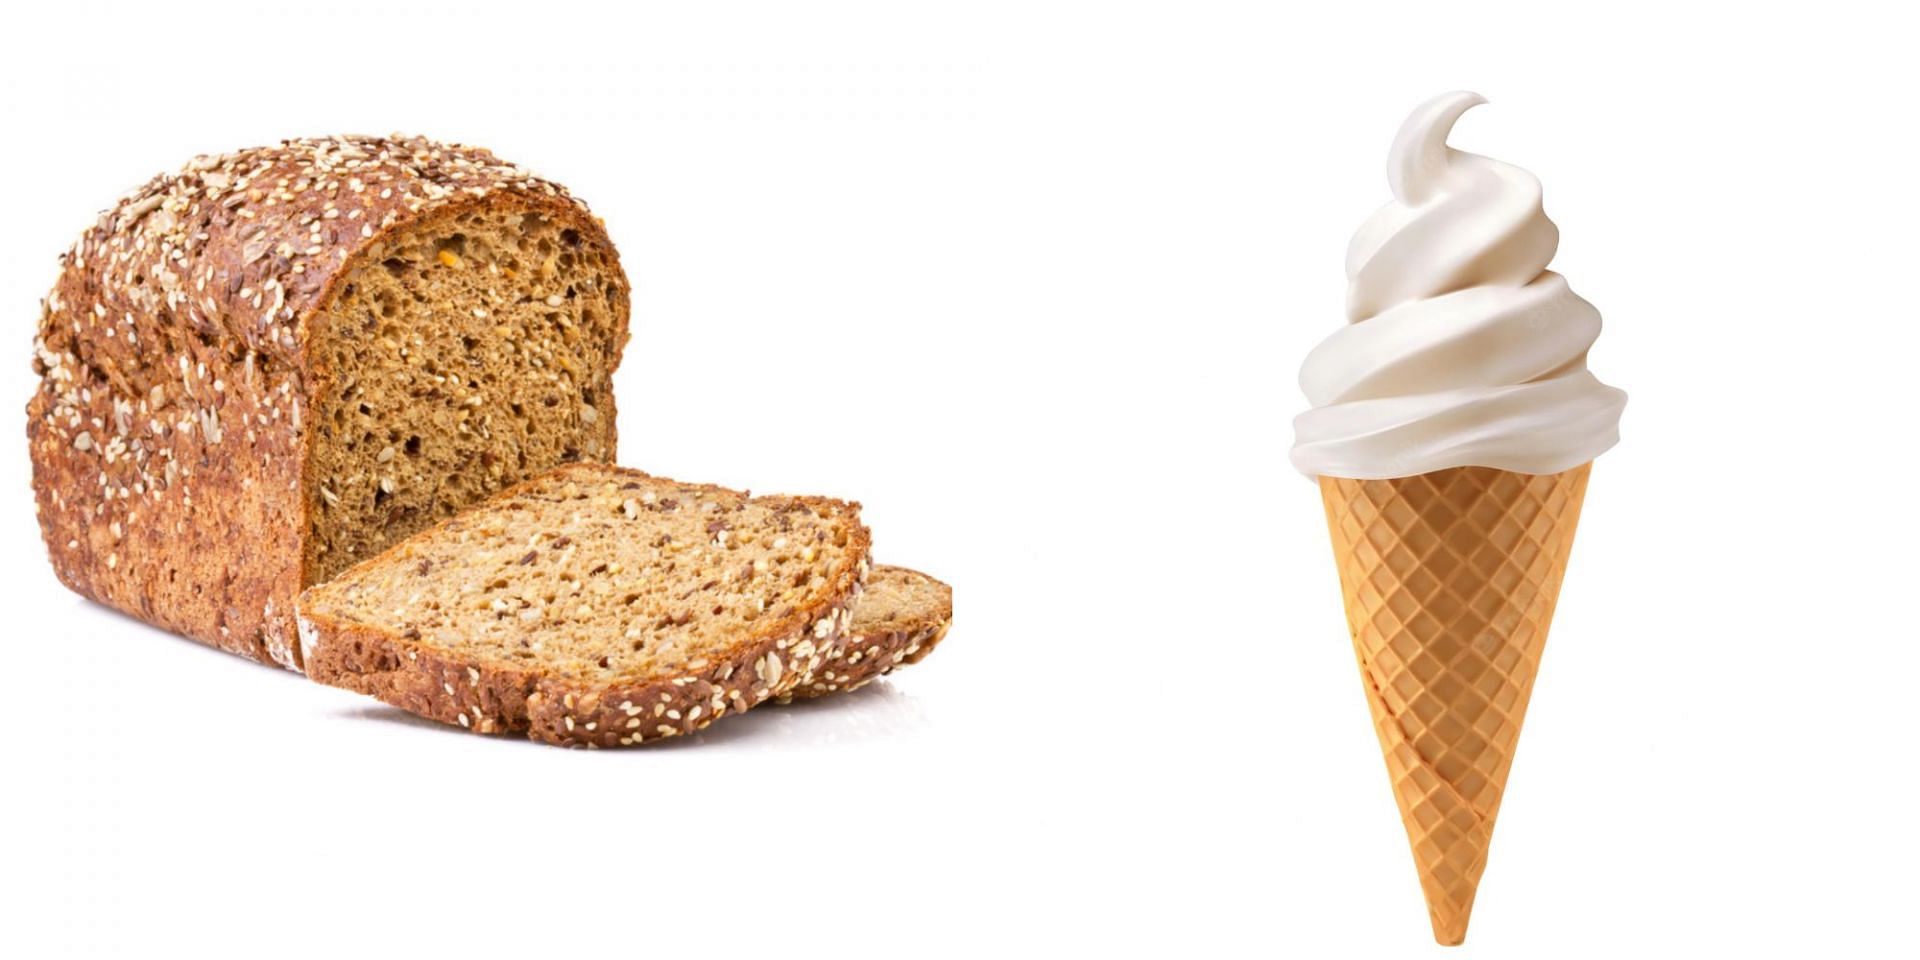 Ice cream or multigrain bread- which one to go for? Tufts&#039; Food Compass Reveals (Image via Twitter)